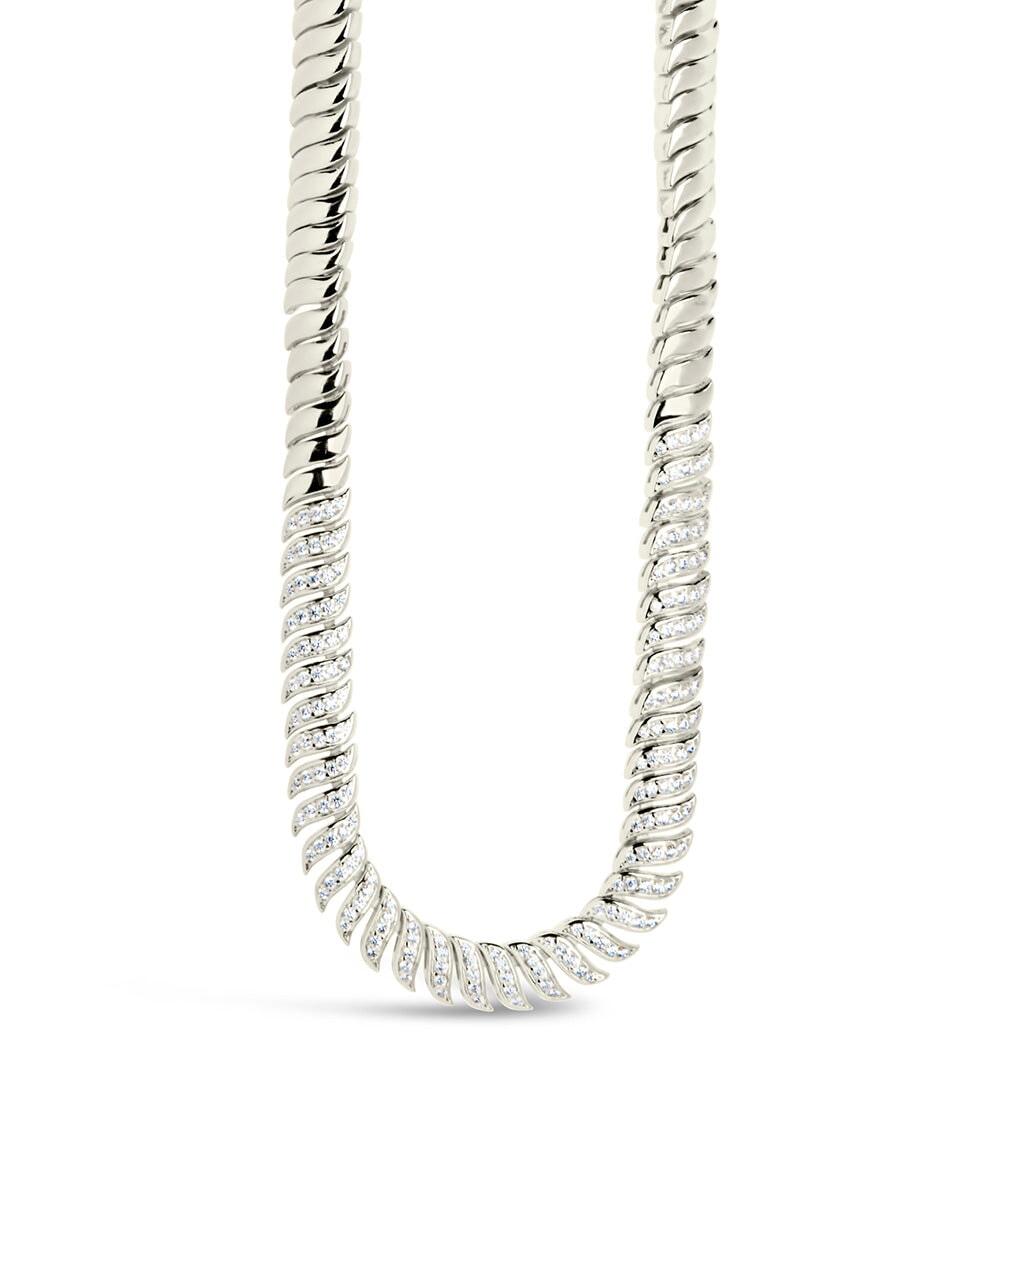 Arabella Chain Necklace Necklace Sterling Forever Silver 